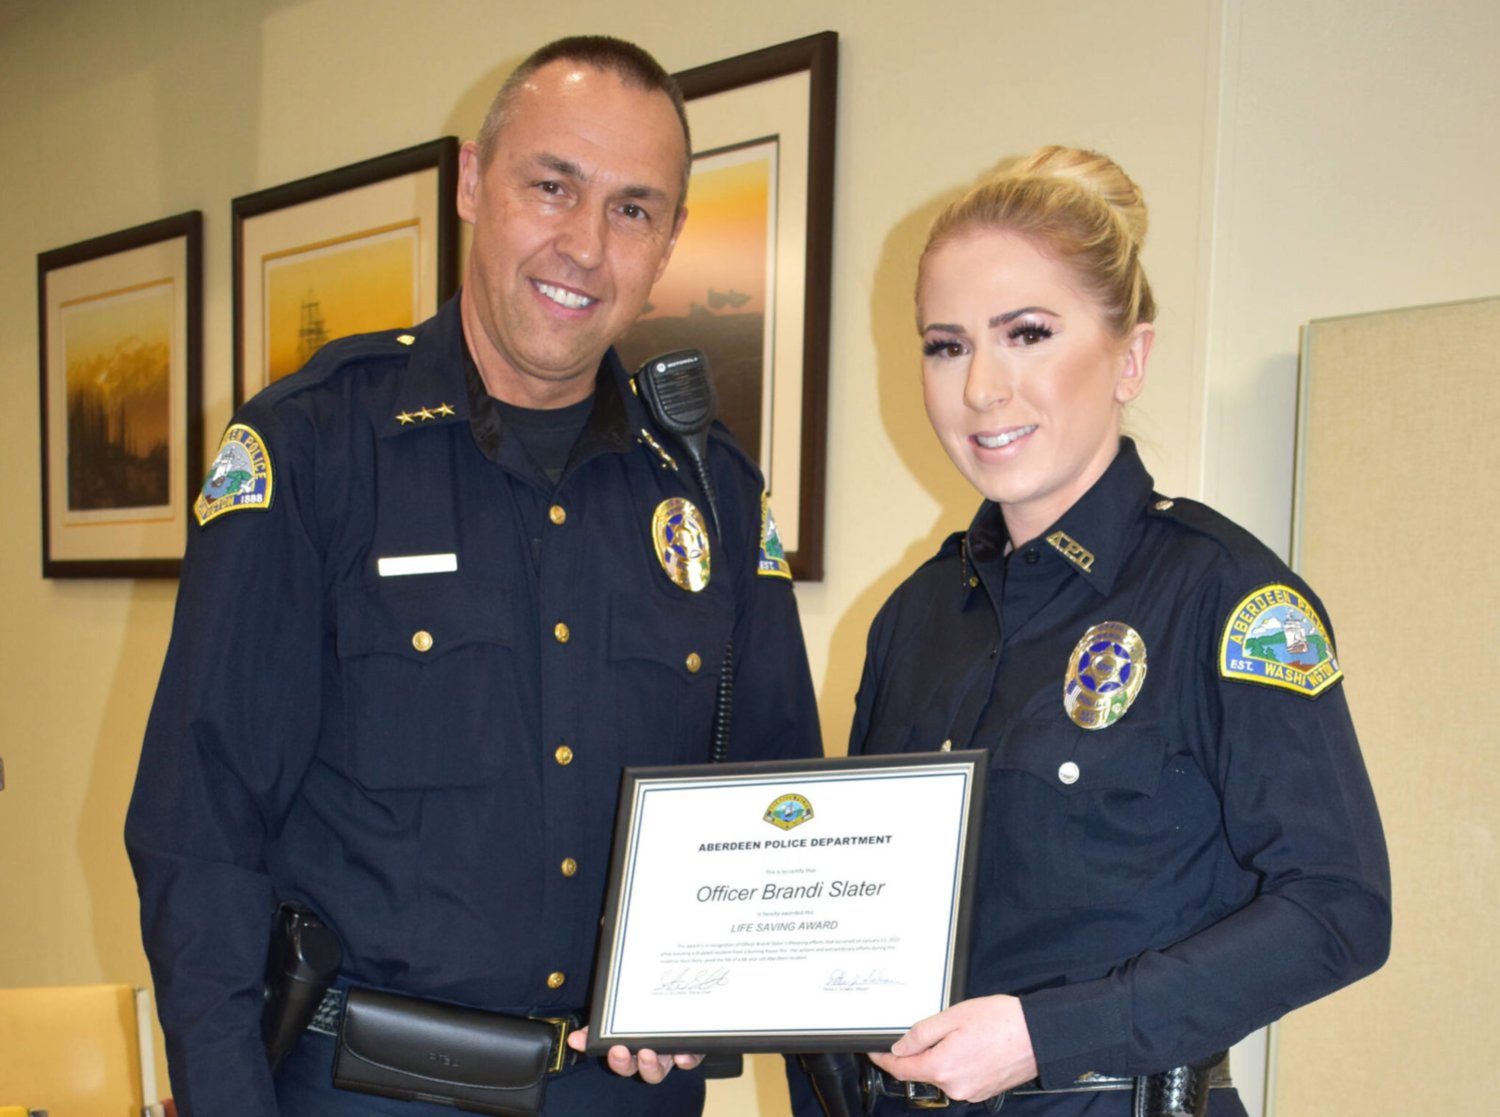 Aberdeen Police Department Chief Steve Shumate bestows the department’s “Lifesaving Award” to fellow APD Officer Brandi Slater after he relayed the story about the call that showed Slater’s mettle. Slater, who’s been with APD for five years, called her save on Thursday morning, Jan. 13, 2022, “a scary moment.”